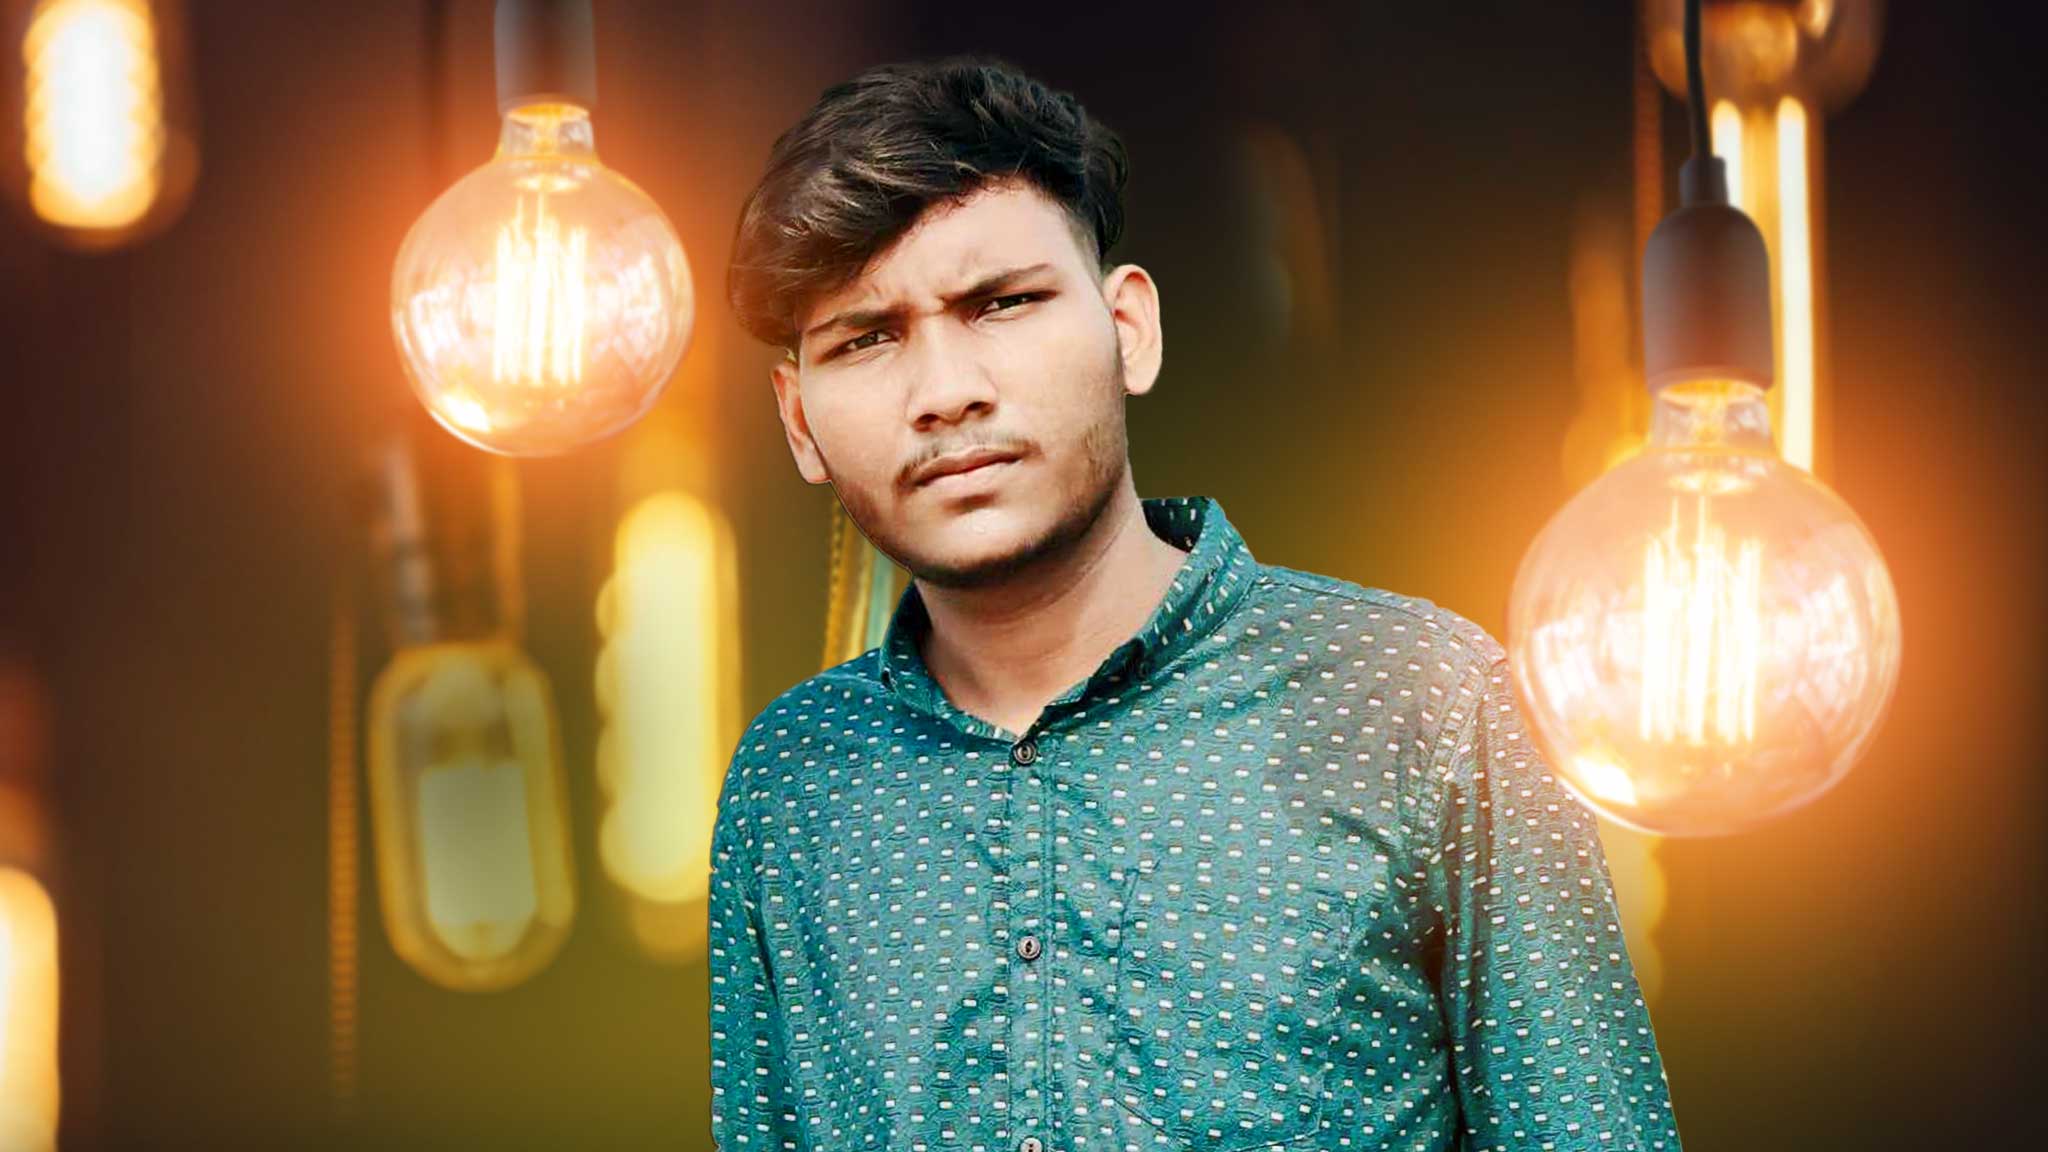 Tanimul Hasan Munna is a digital creator and musician artist who is about to make his music debut